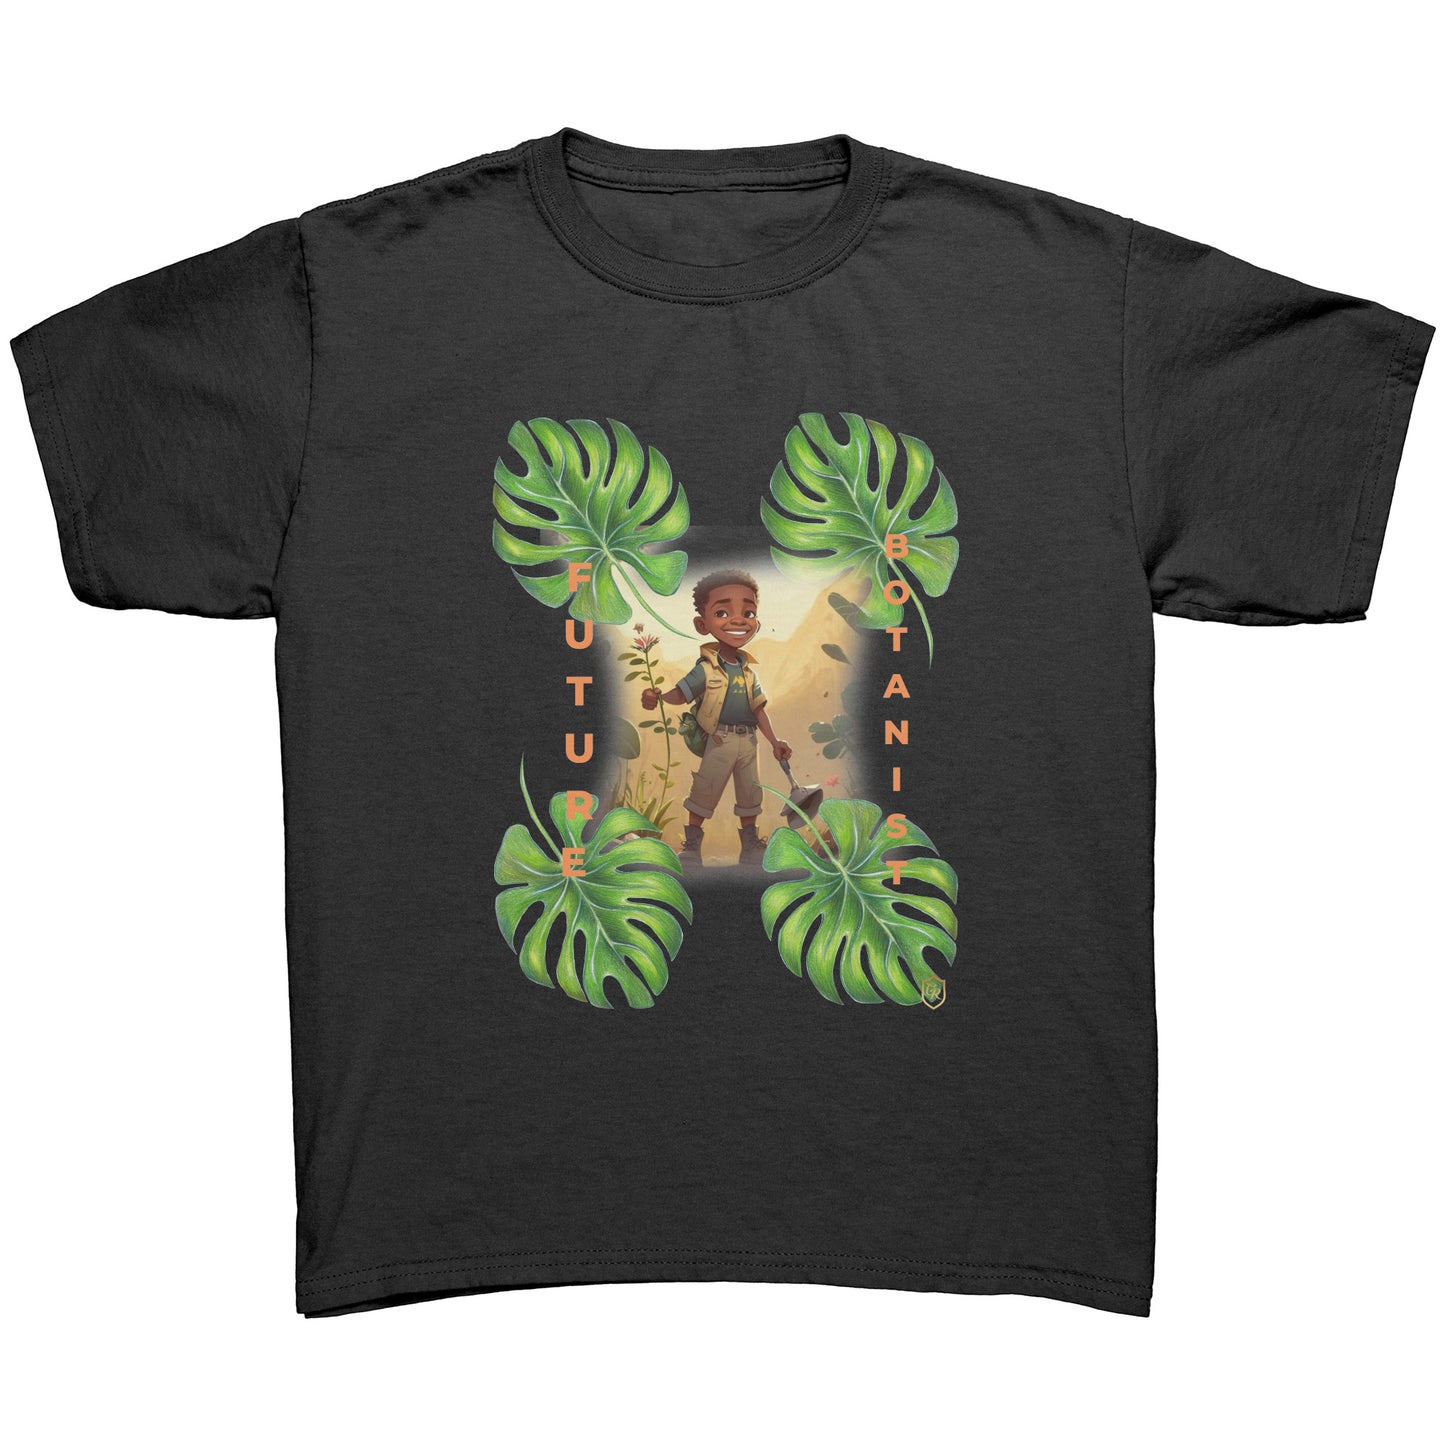 Young Boy's Botanist of the Future T-shirt